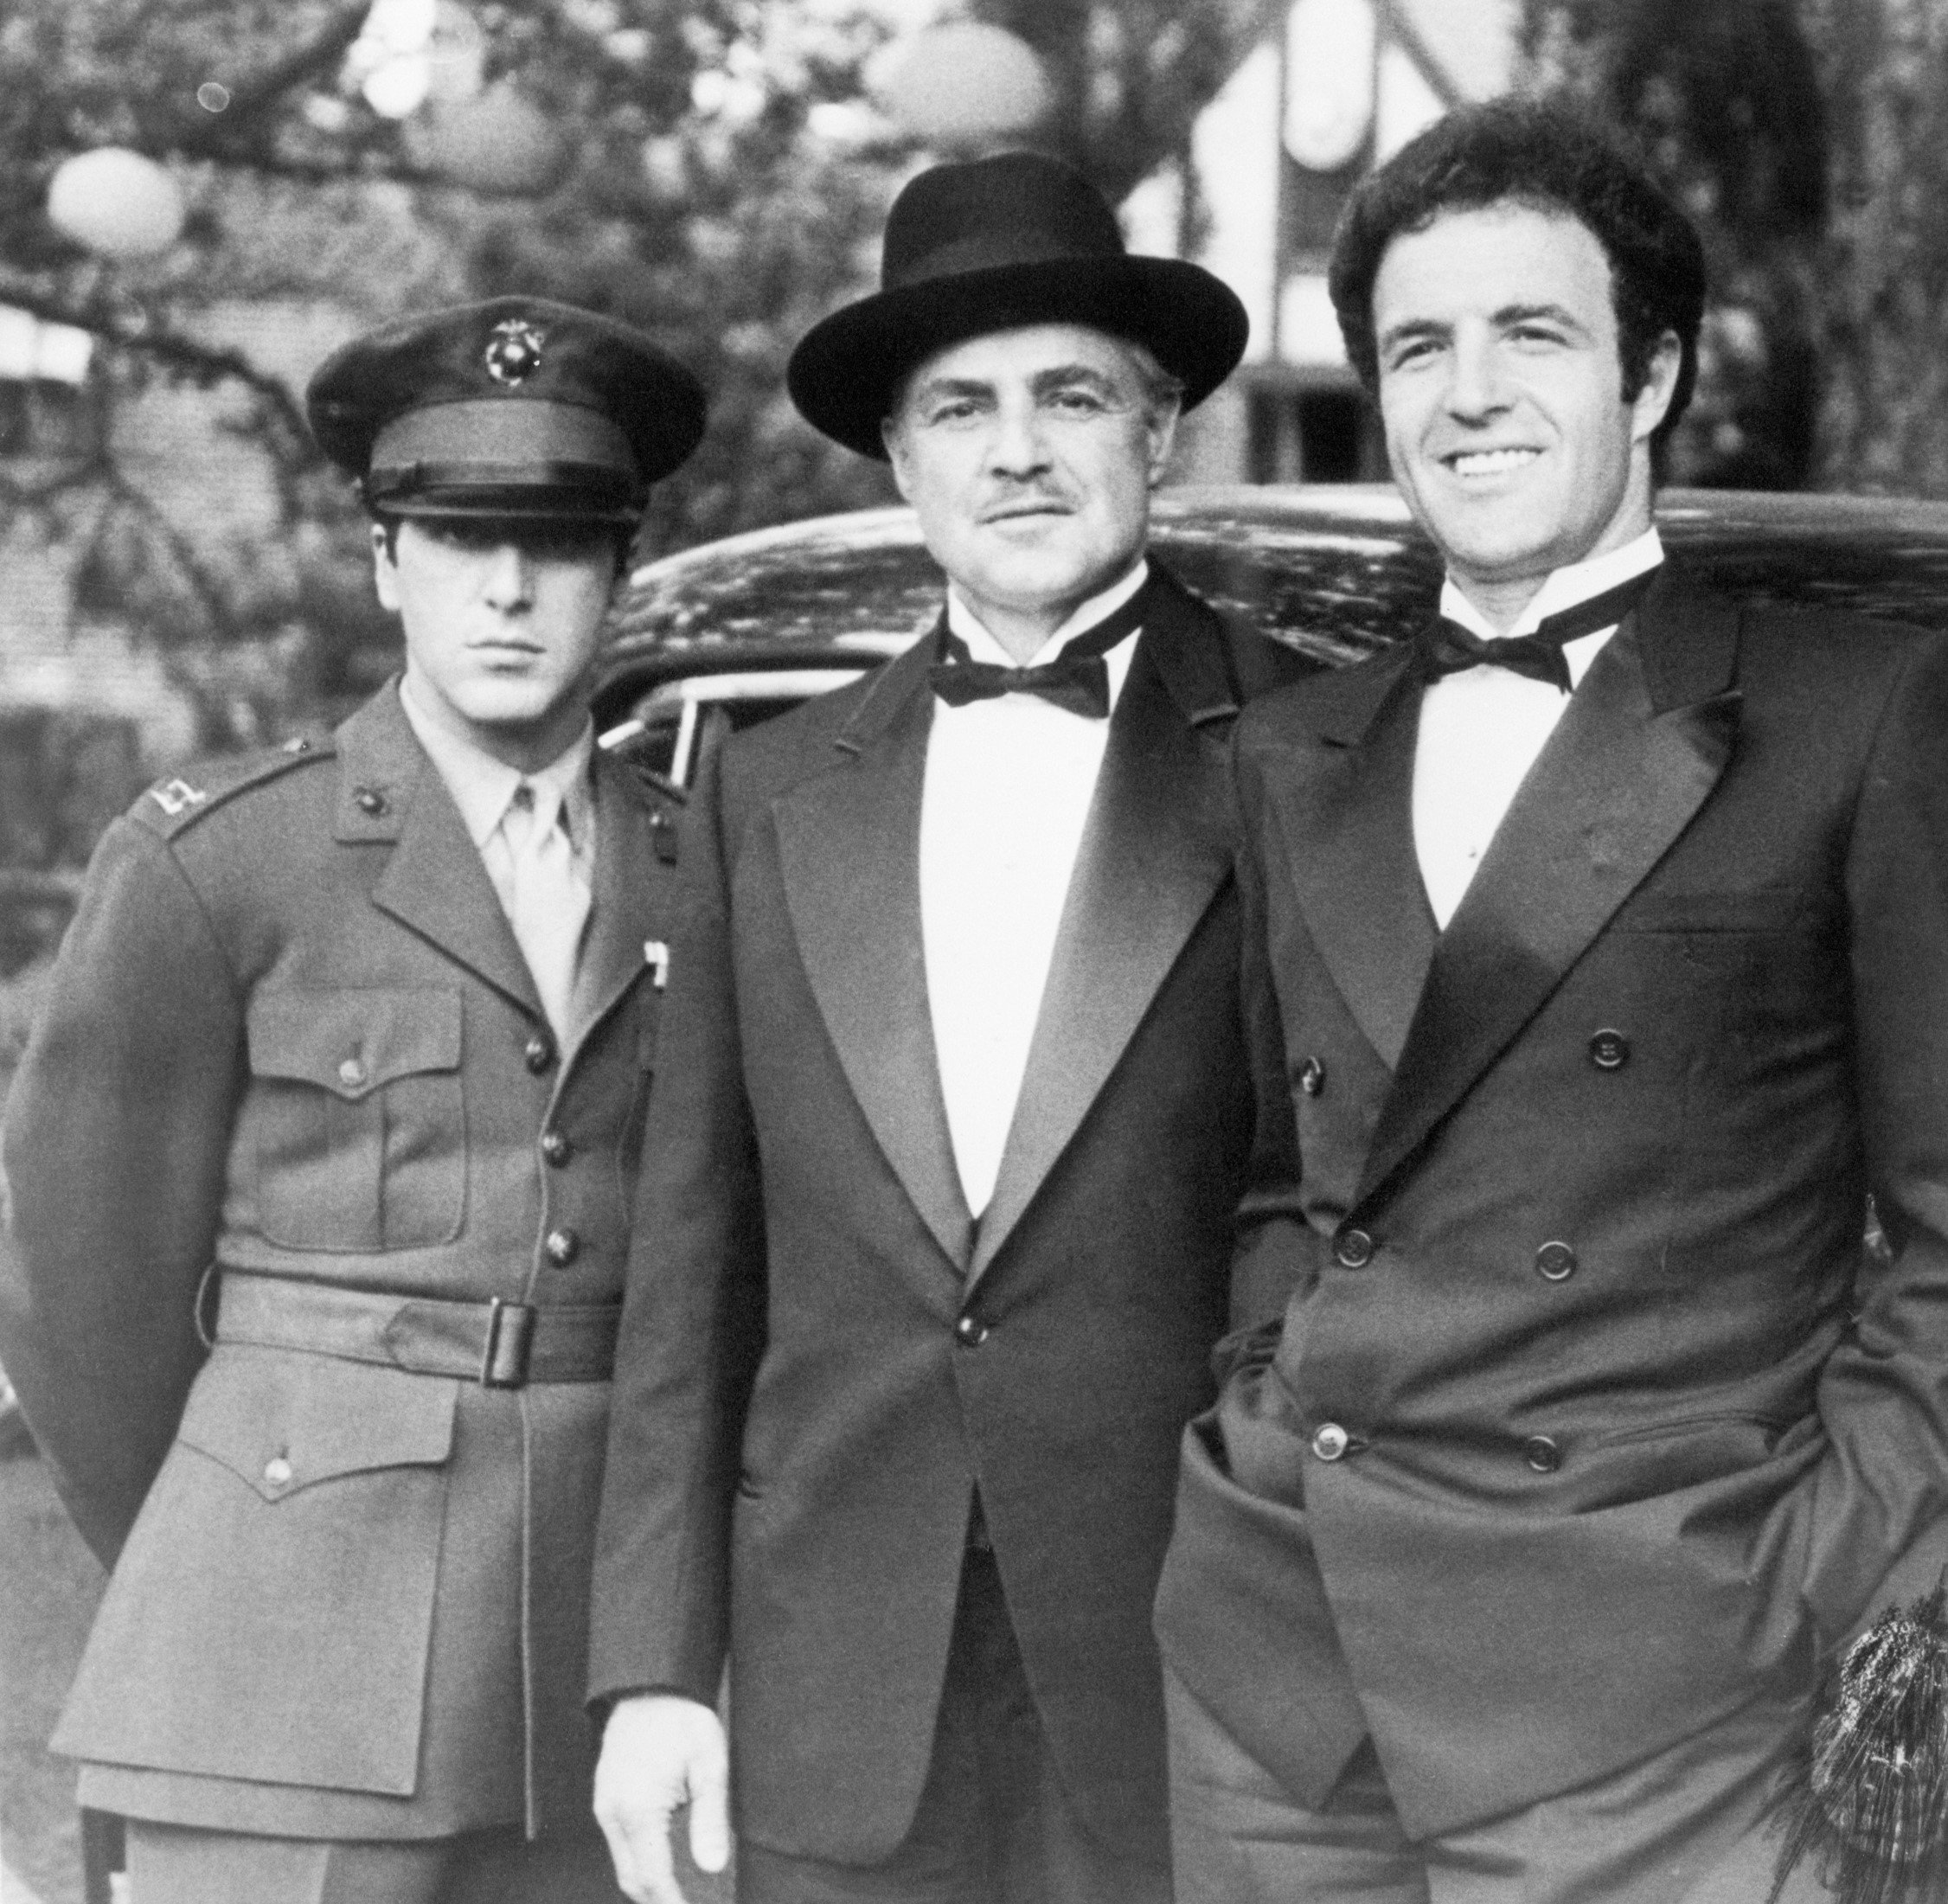 A black and white picture of Al Pacino, Marlon Brando, and James Caan on the set of 'The Godfather.'